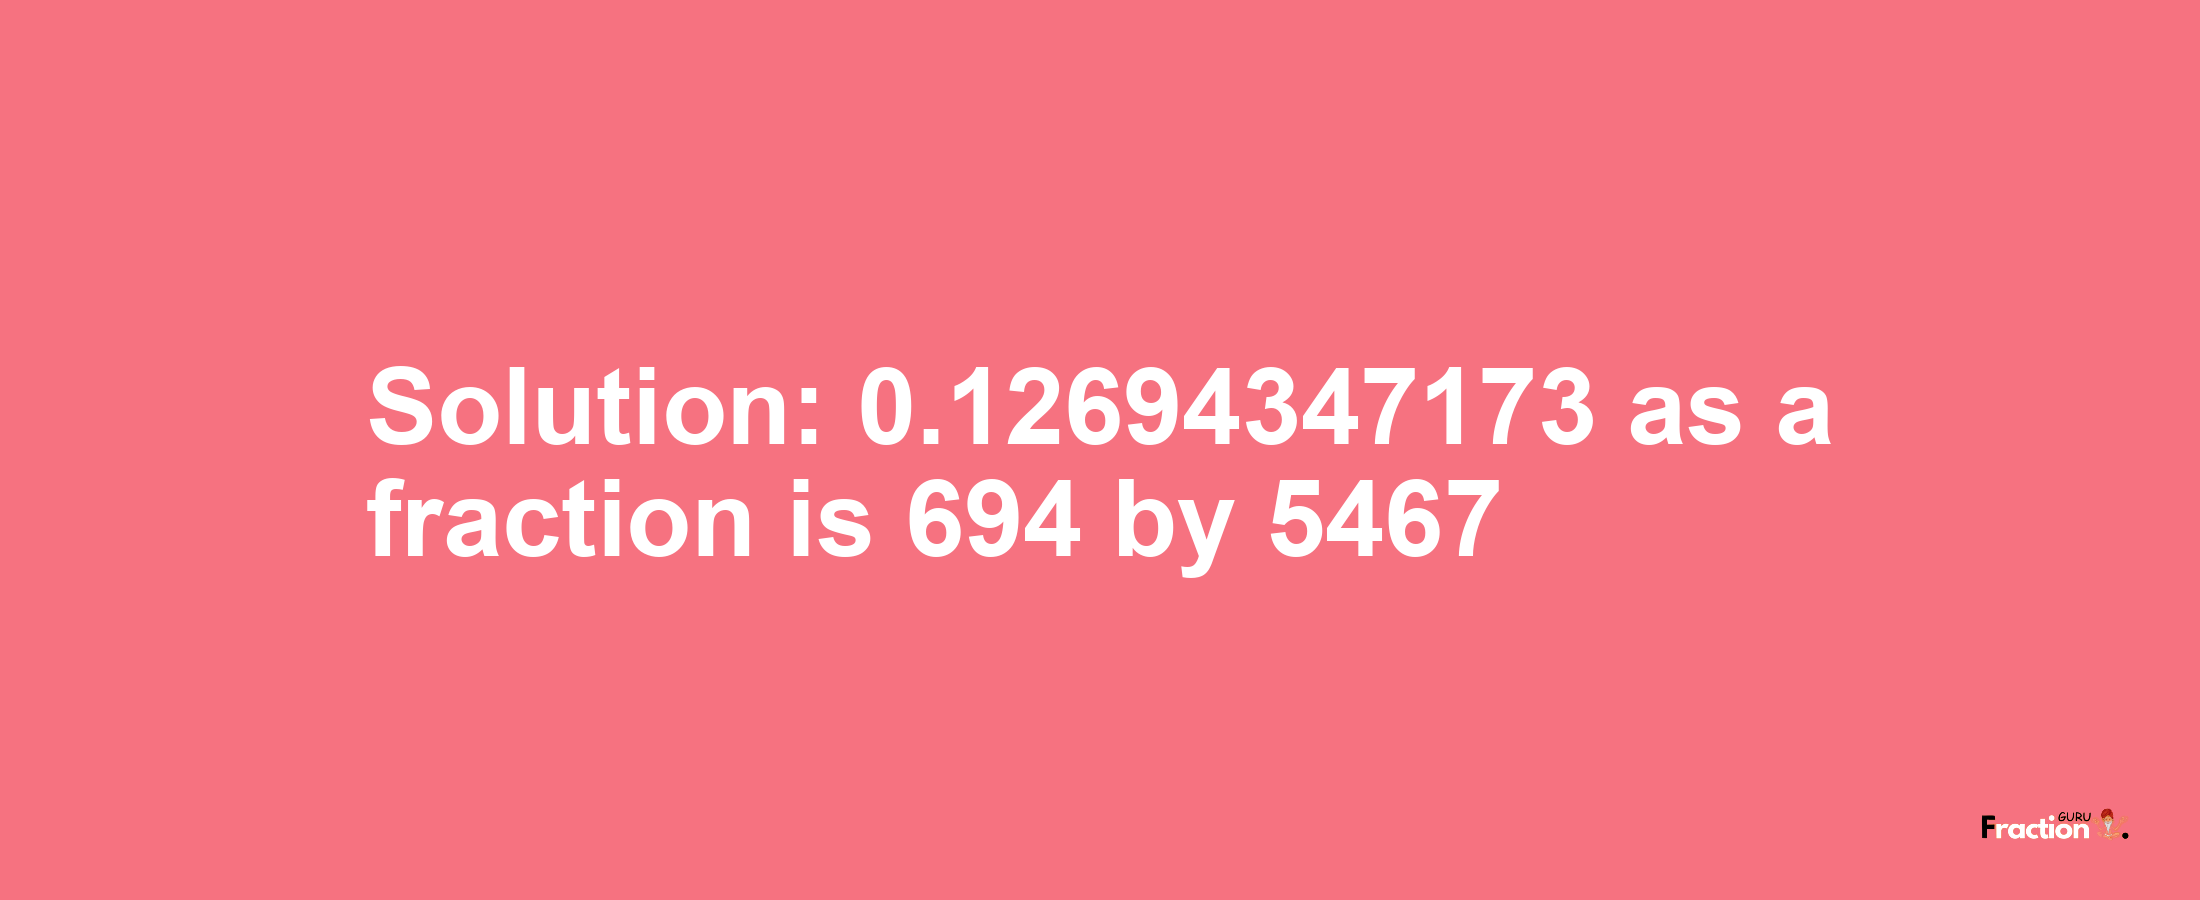 Solution:0.12694347173 as a fraction is 694/5467